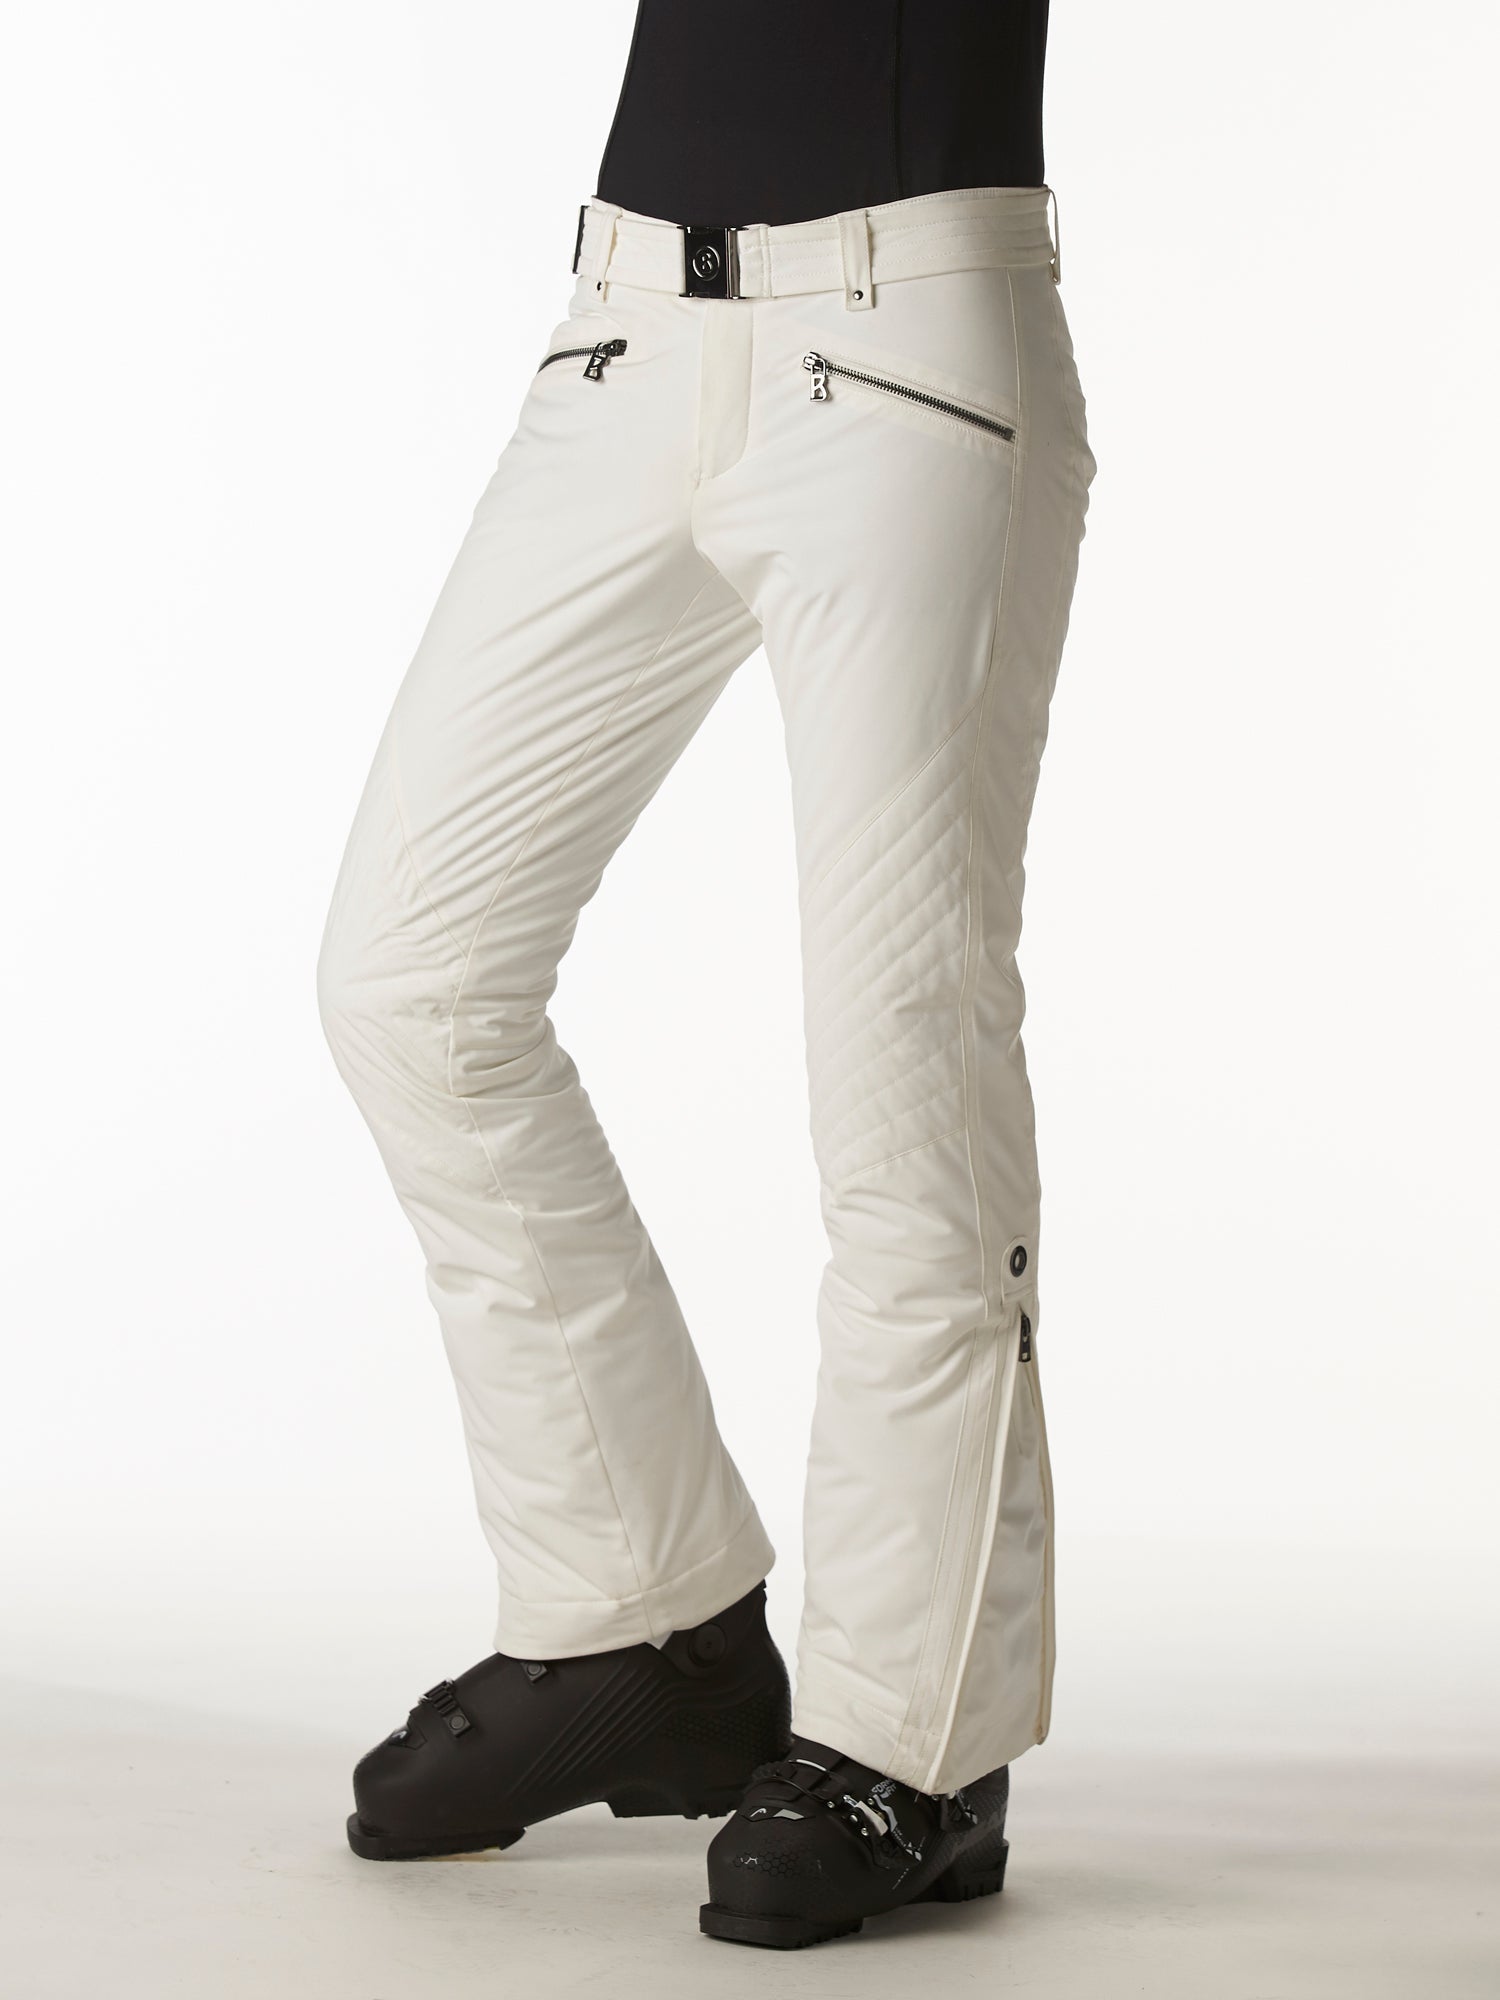 Bogner Embroidered Ponte Ski Pants In Yellow